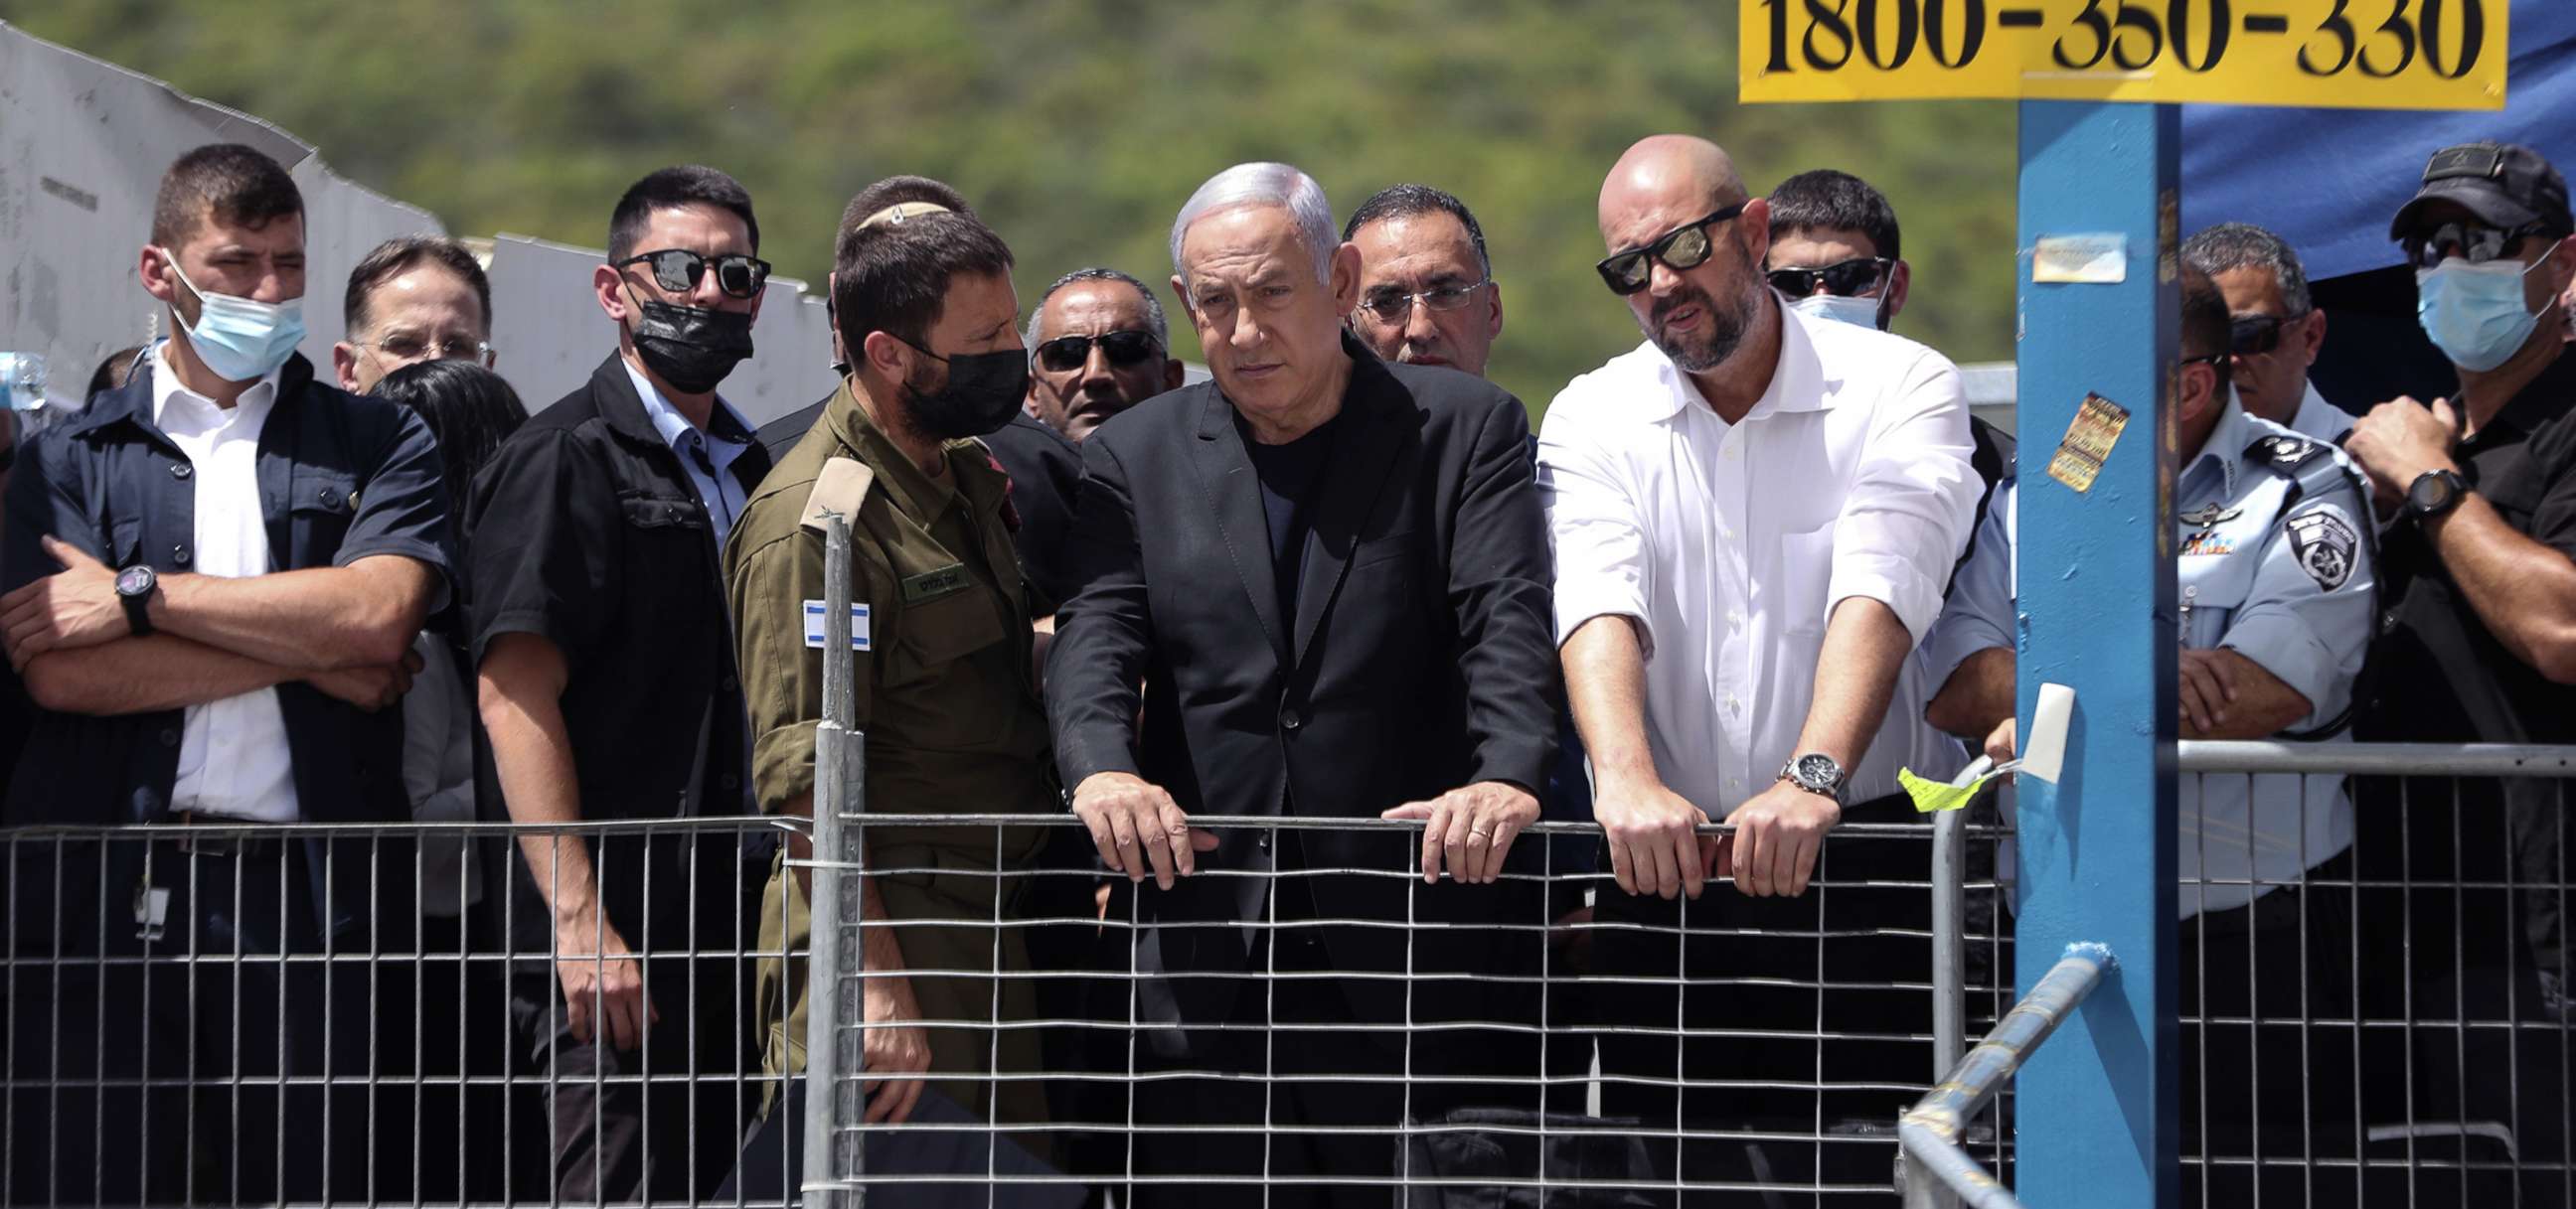 PHOTO: Israeli Prime Minister Benjamin Netanyahu visits Mount Meron, northern Israel, where fatalities were reported among the thousands of ultra-Orthodox Jews gathered for annual commemorations that include all-night prayer and dance, April 30, 2021.